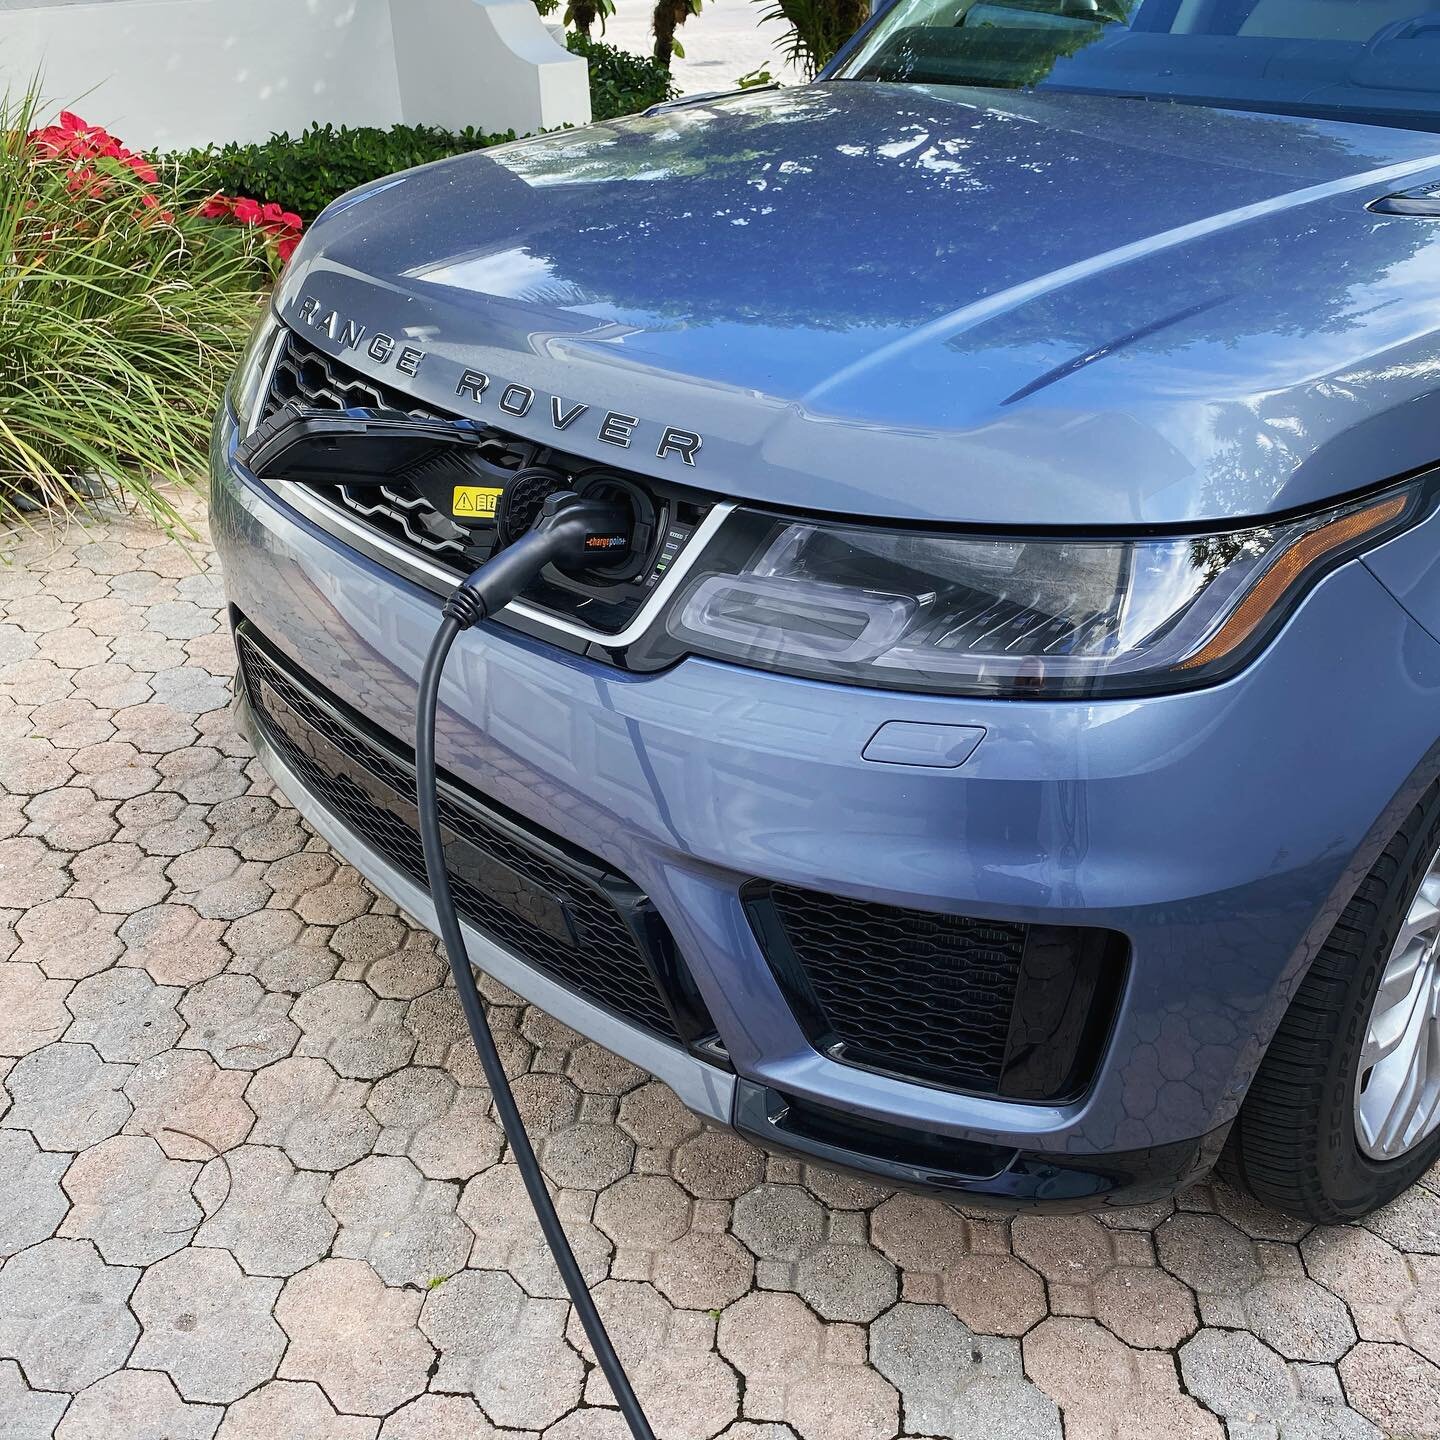 ChargePoint electric vehicle charger for Range Rover PHEV #rangerover #evcar #evcharging #phev